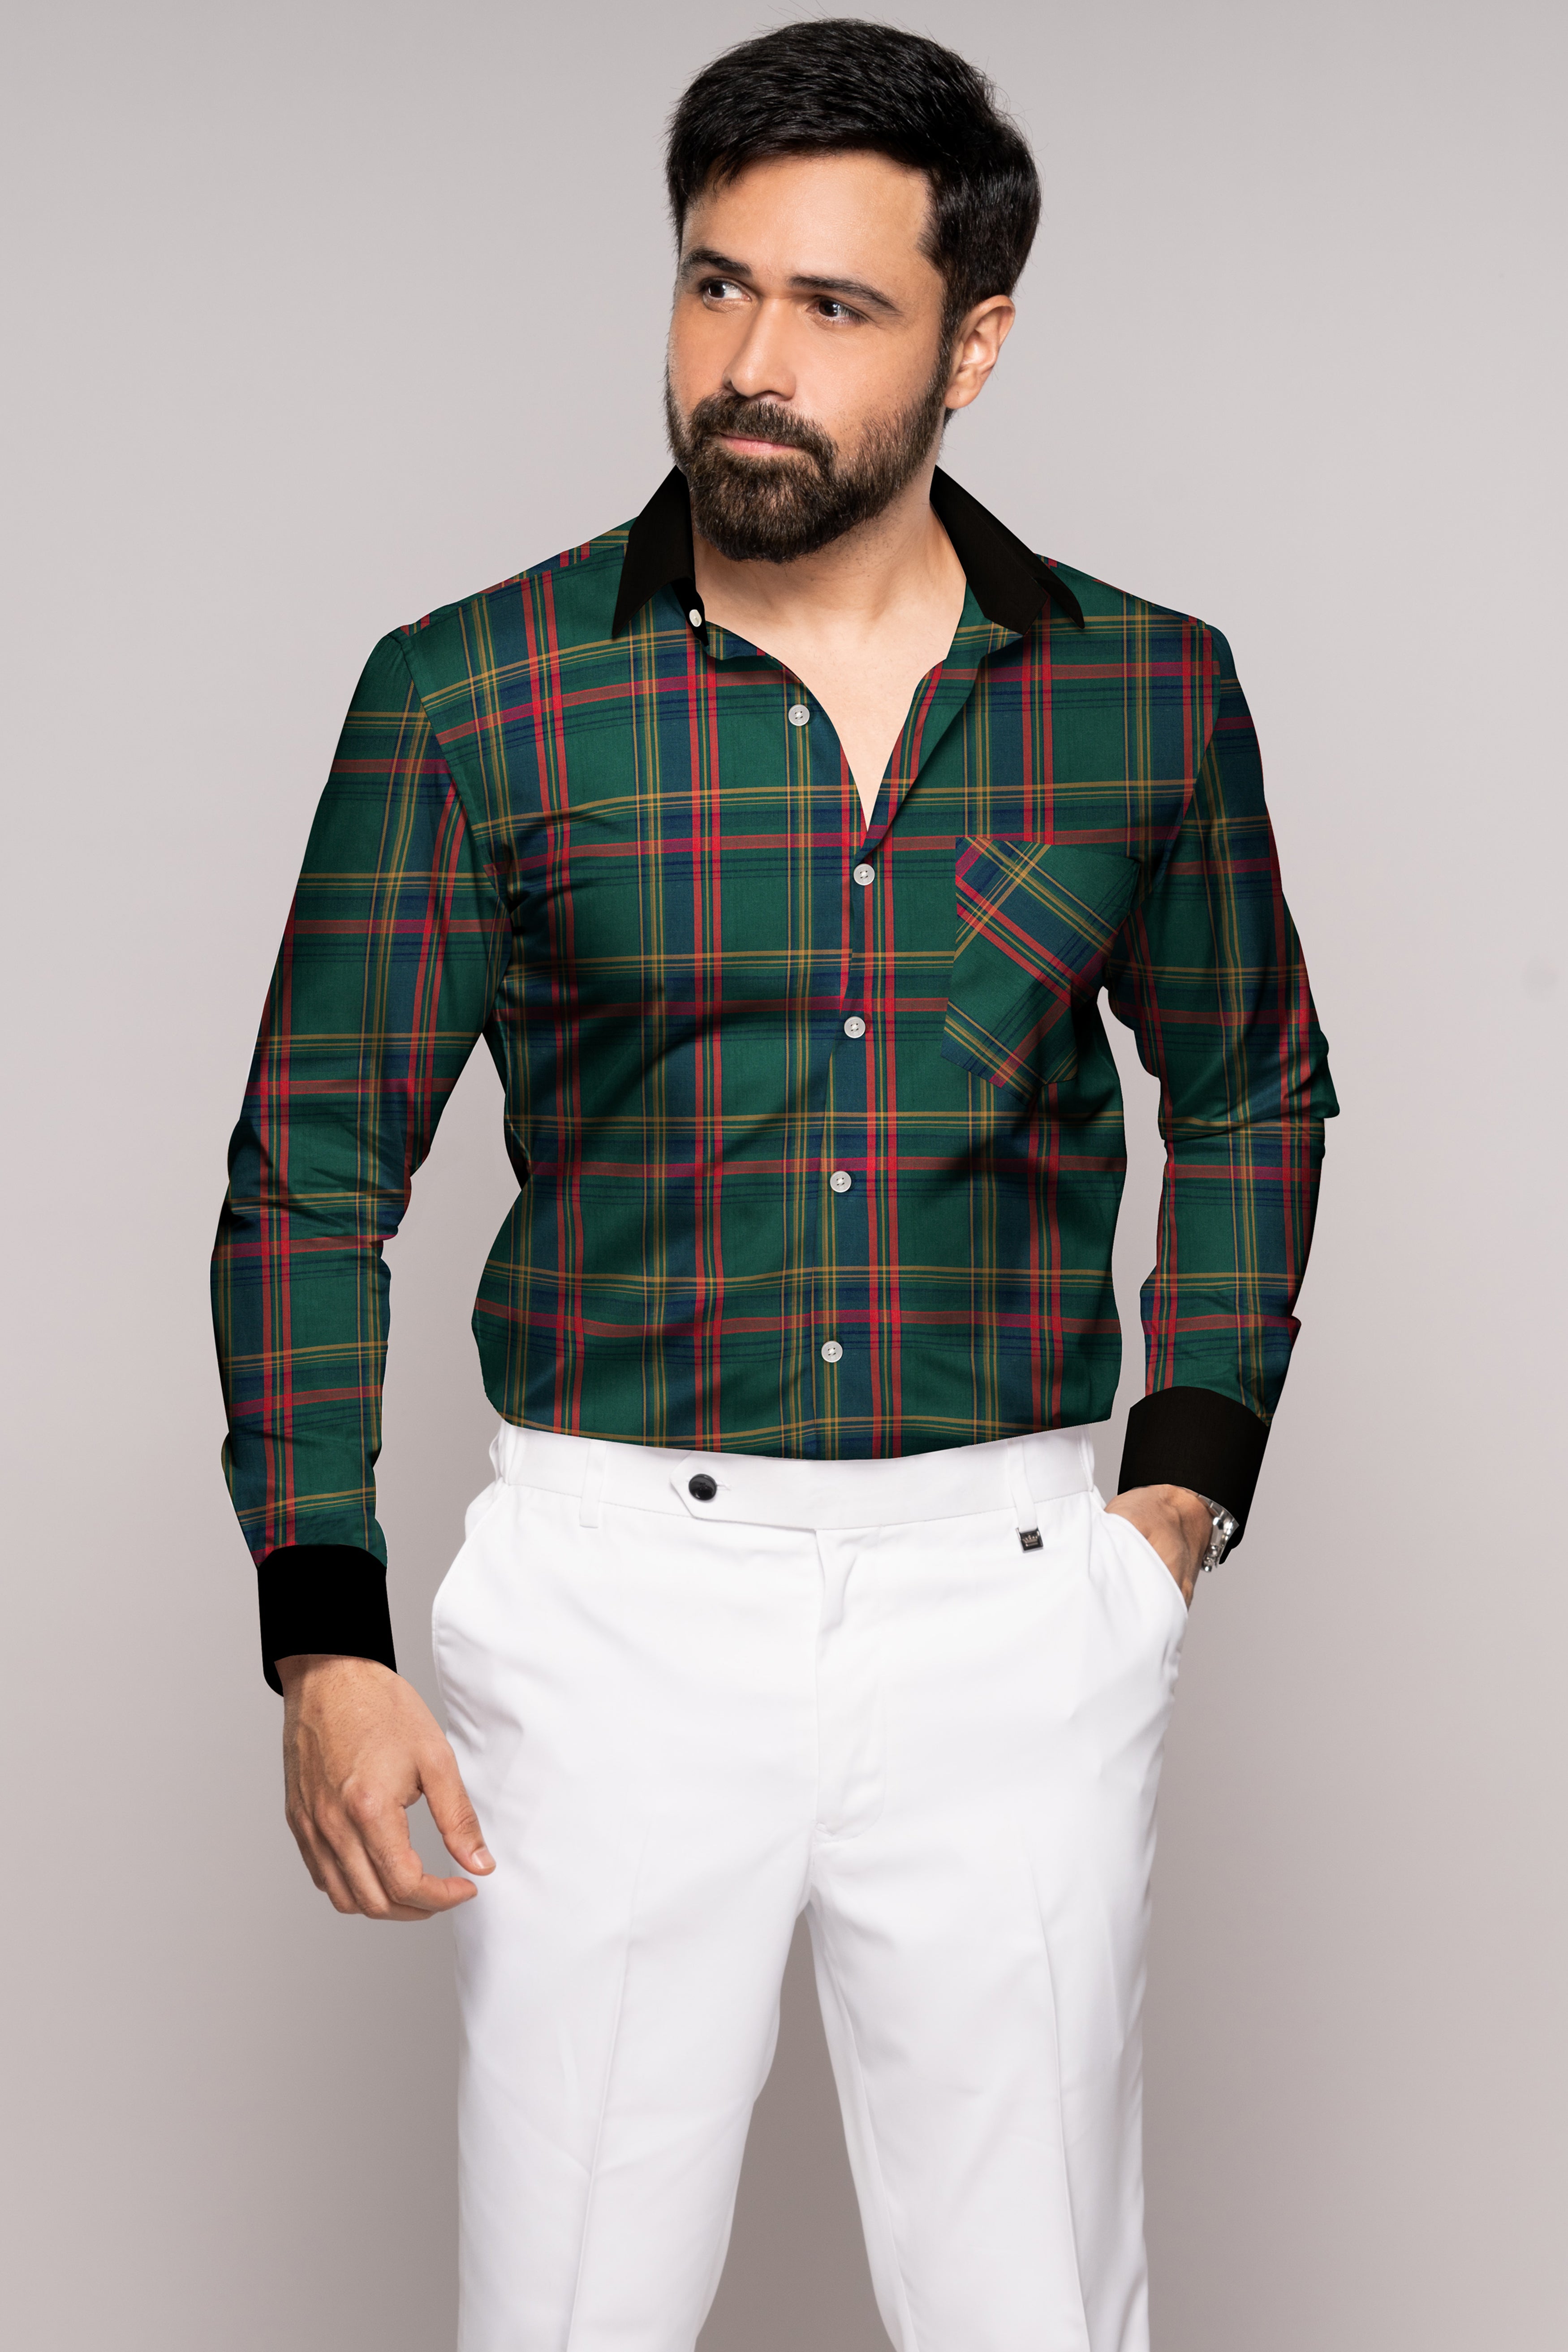 Everglade Green and Stiletto Red Plaid With Black Cuffs and Collar Twill Premium Cotton Shirt